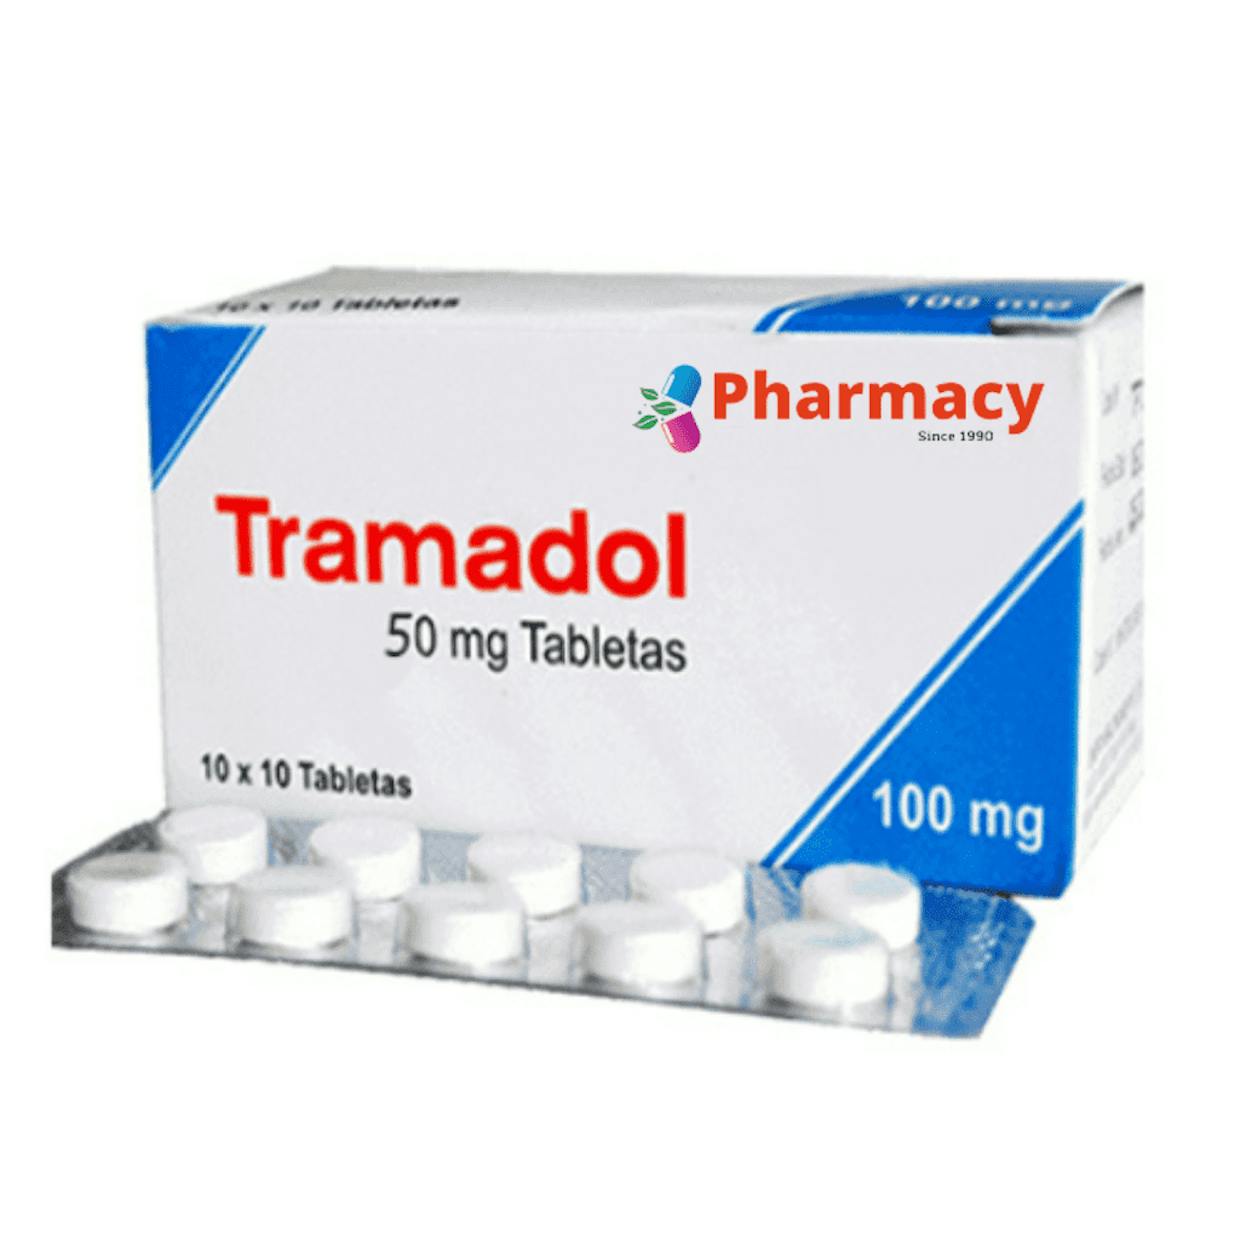 Where to Buy Tramadol Online Without RX?